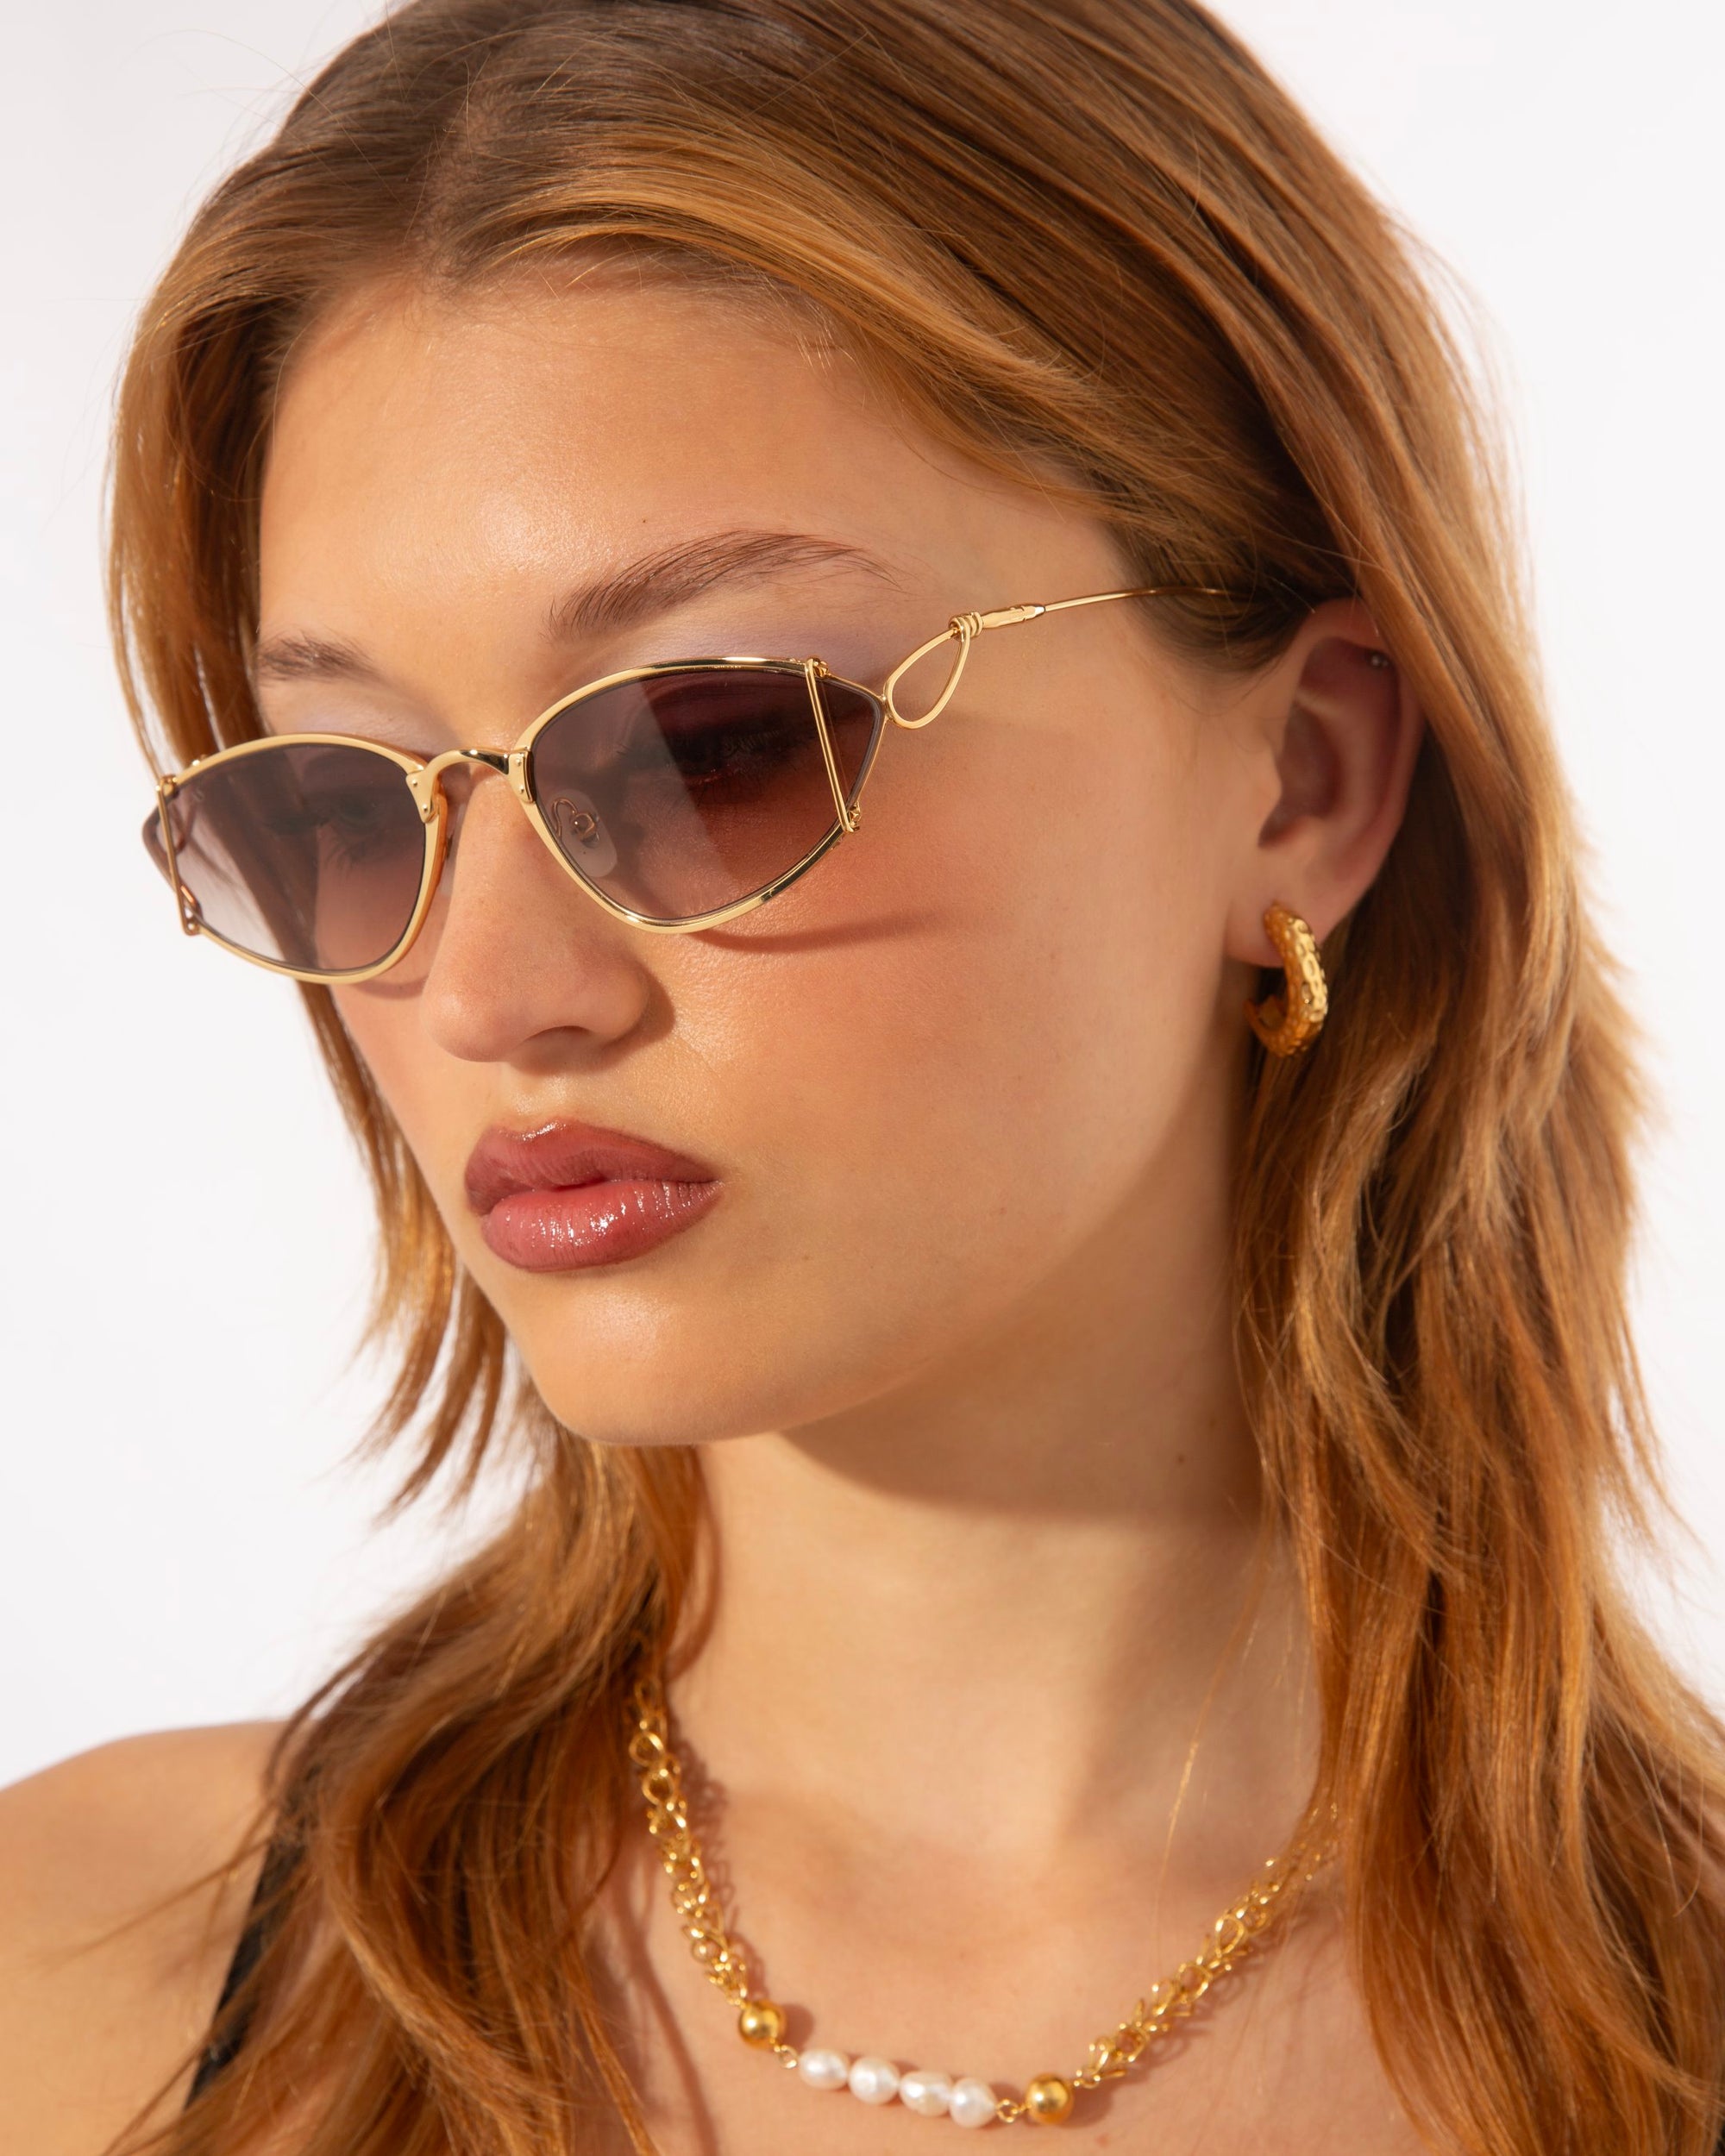 A person with shoulder-length light brown hair wears stylish Ornate sunglasses by For Art&#39;s Sake®, a gold hoop earring, and an 18-karat gold-plated necklace accented with pearls. The background is plain white, highlighting the accessories and the person&#39;s relaxed expression.